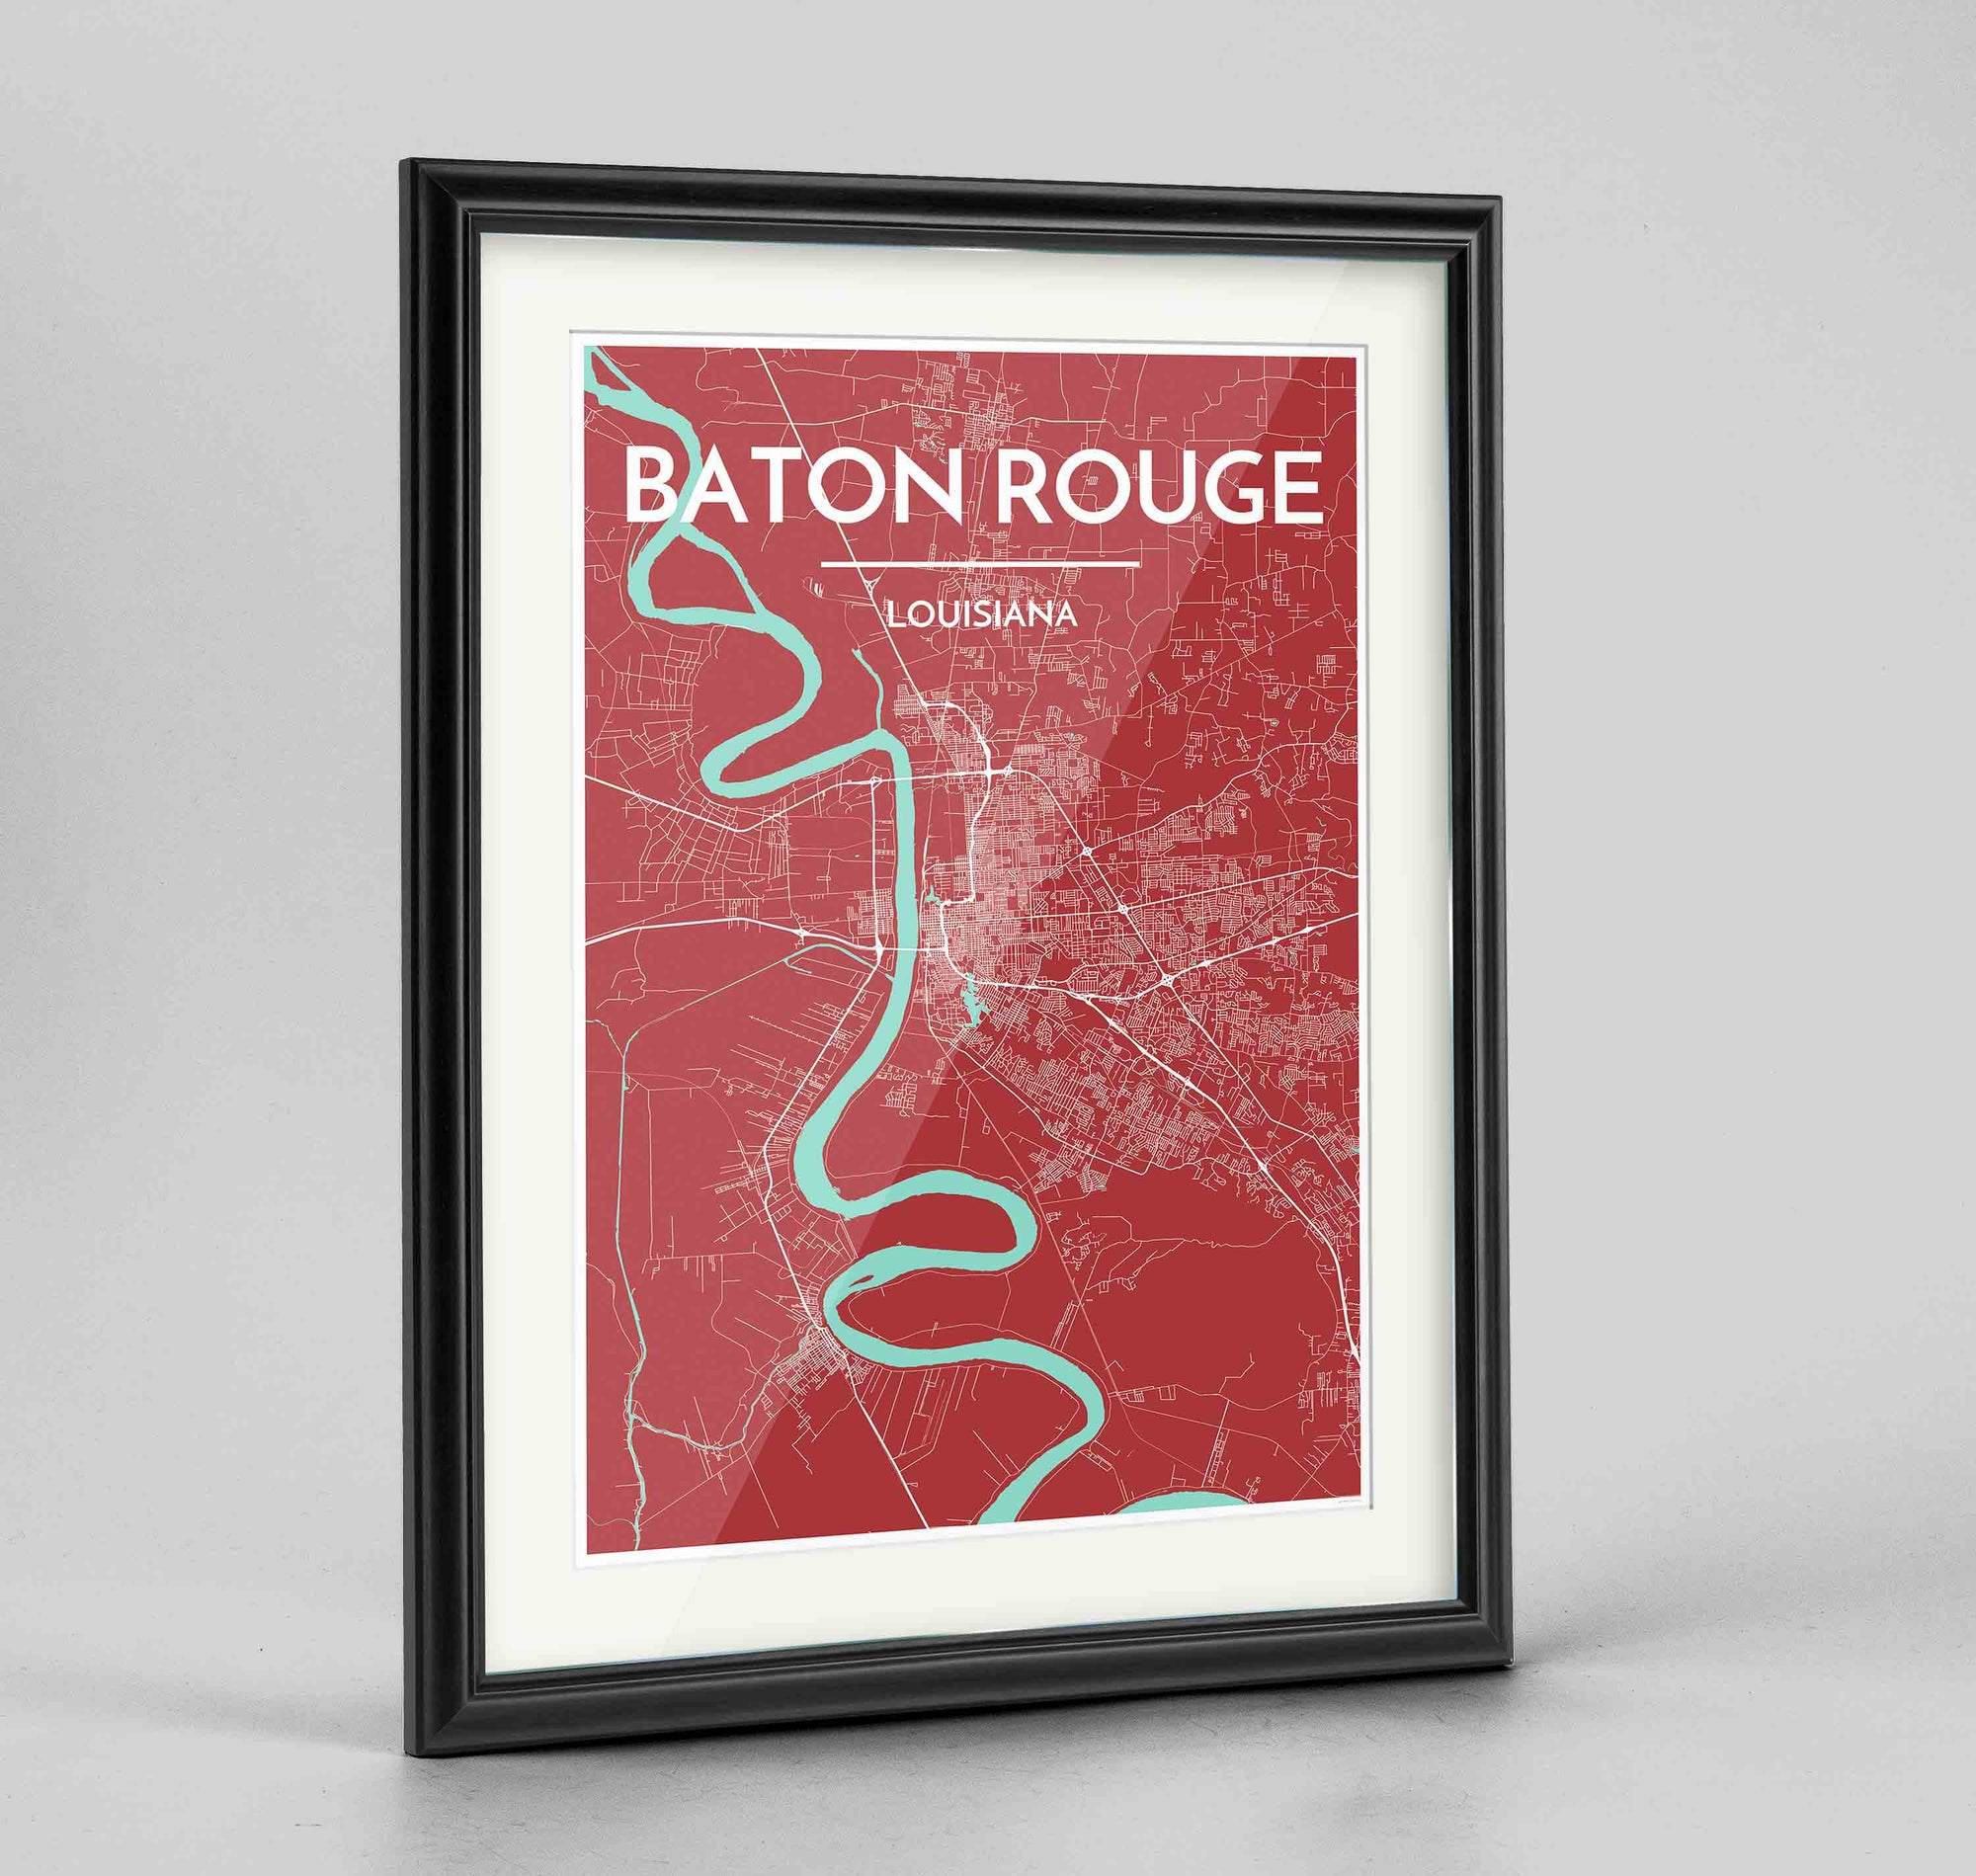 Framed Baton Rouge Map Art Print 24x36" Traditional Black frame Point Two Design Group